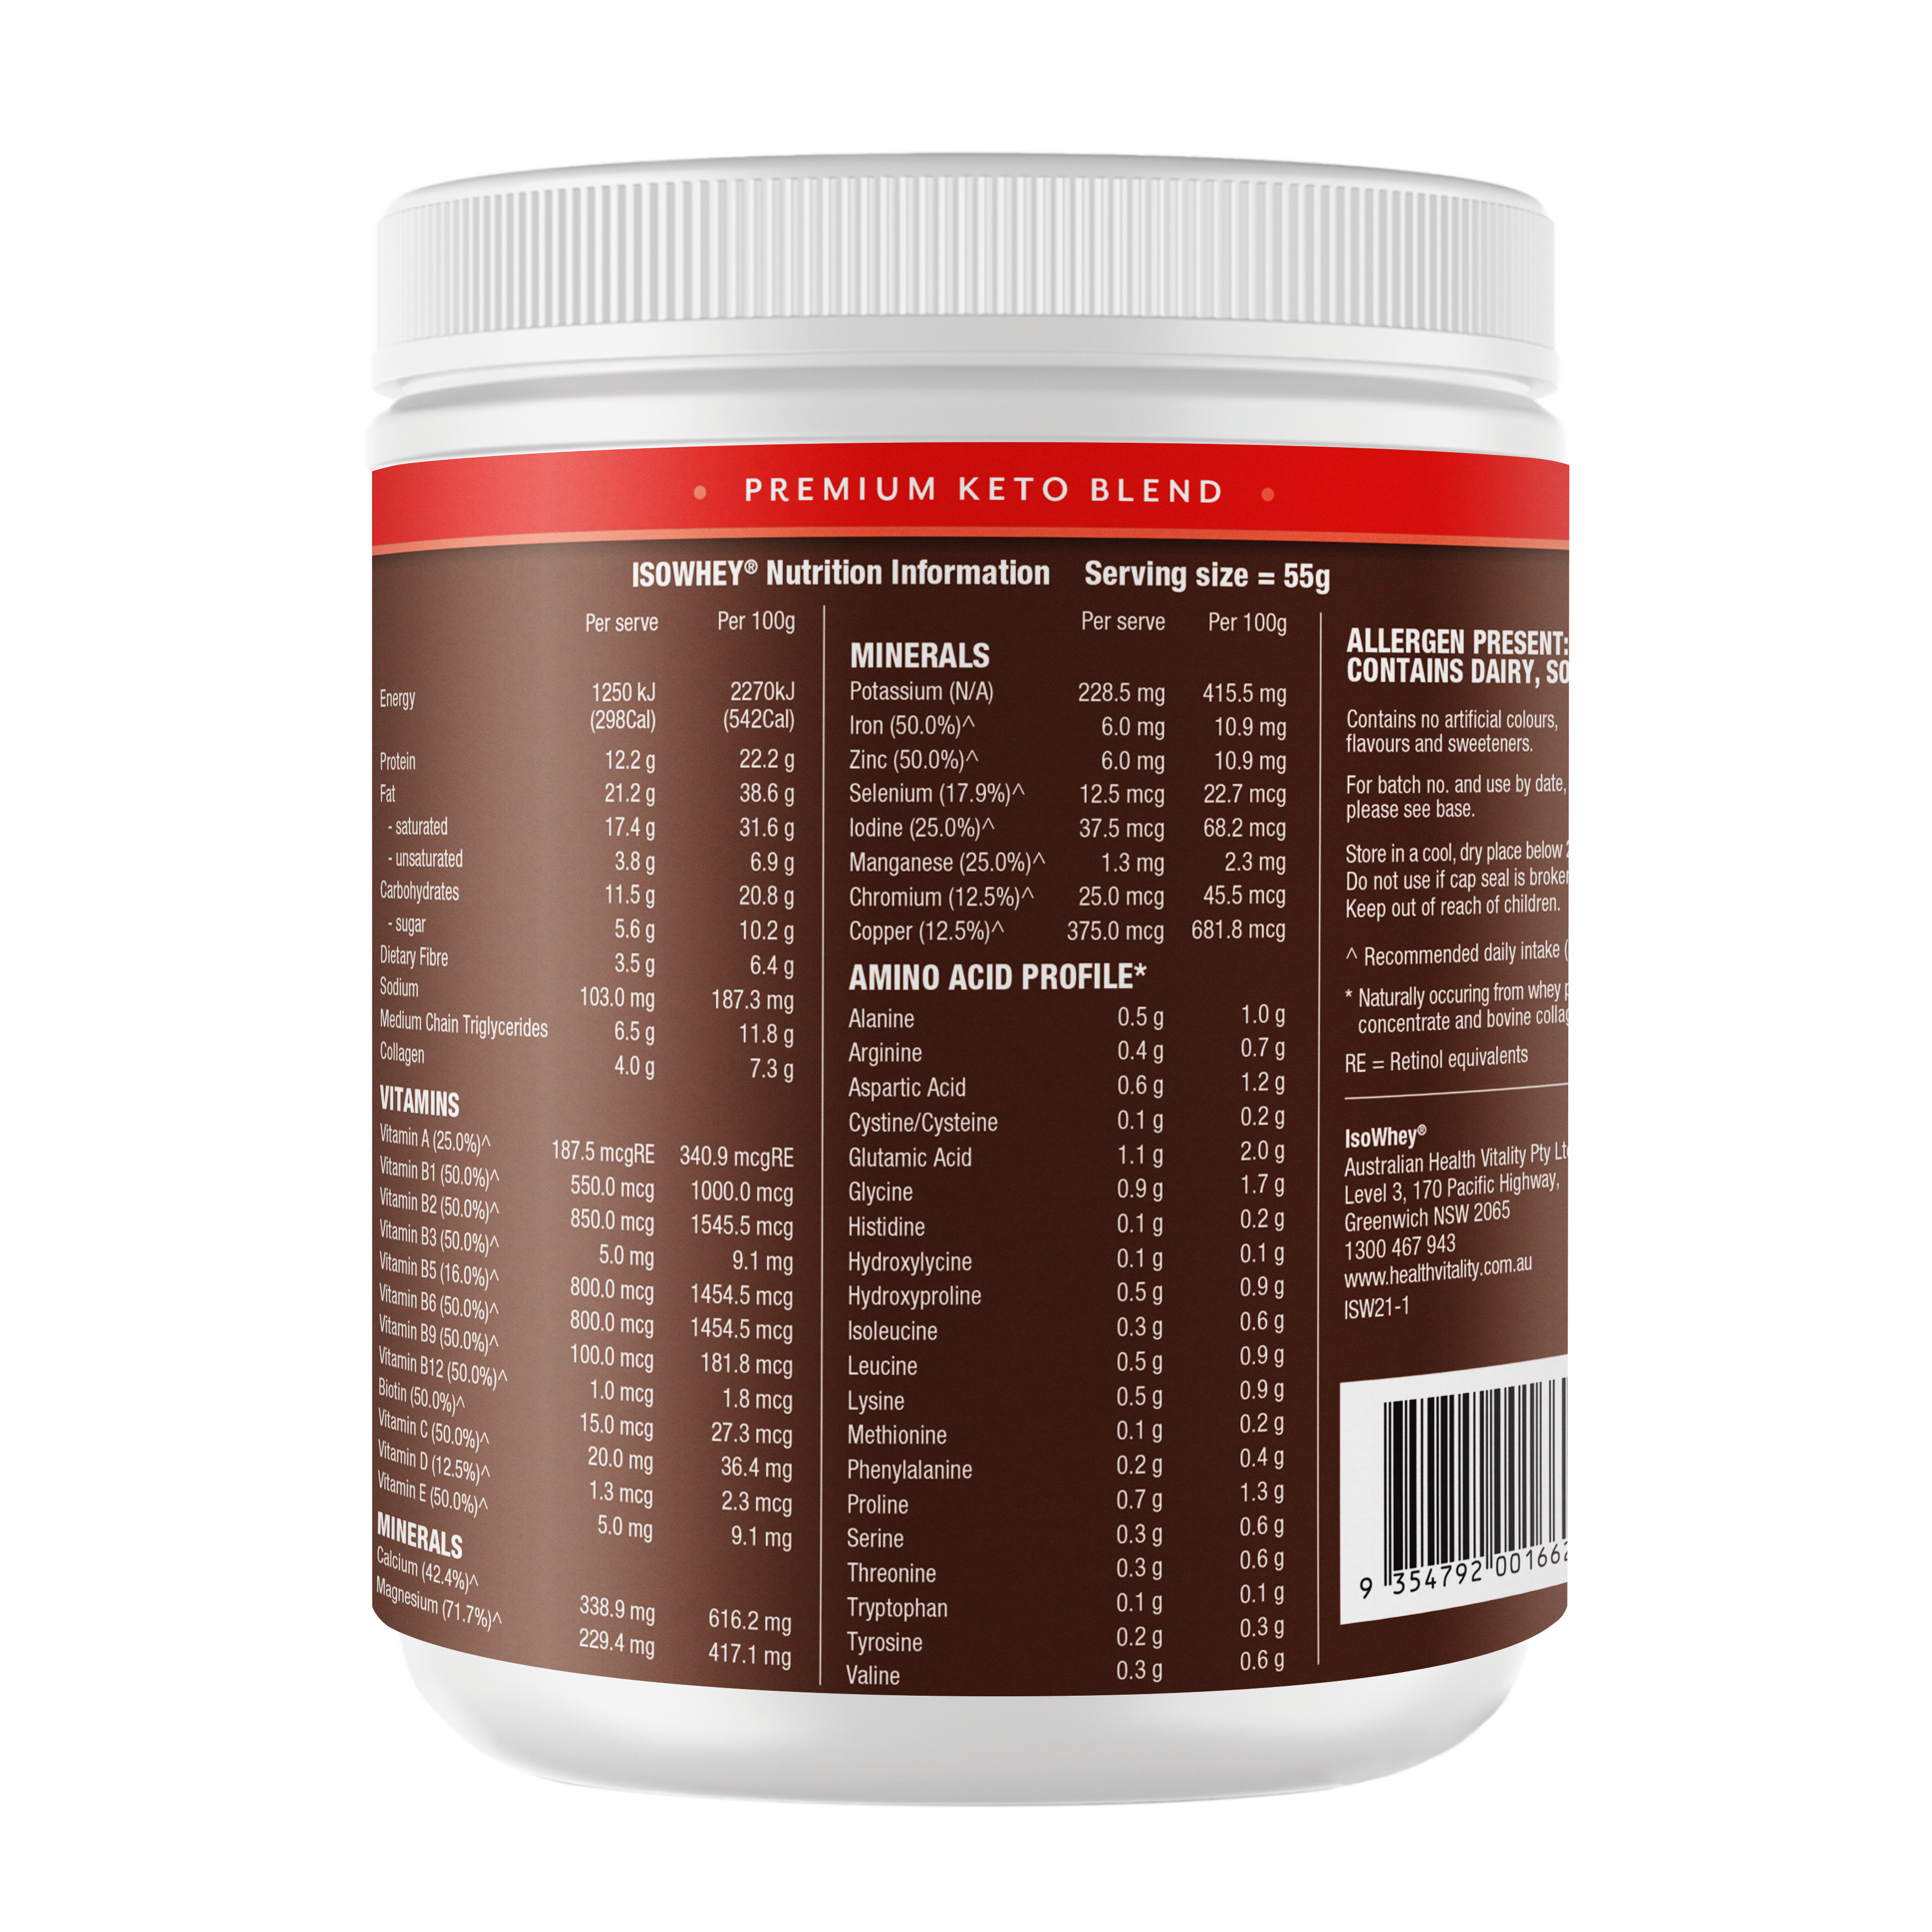 IsoWhey Keto Meal Replacement Shake Chocolate 550g back label